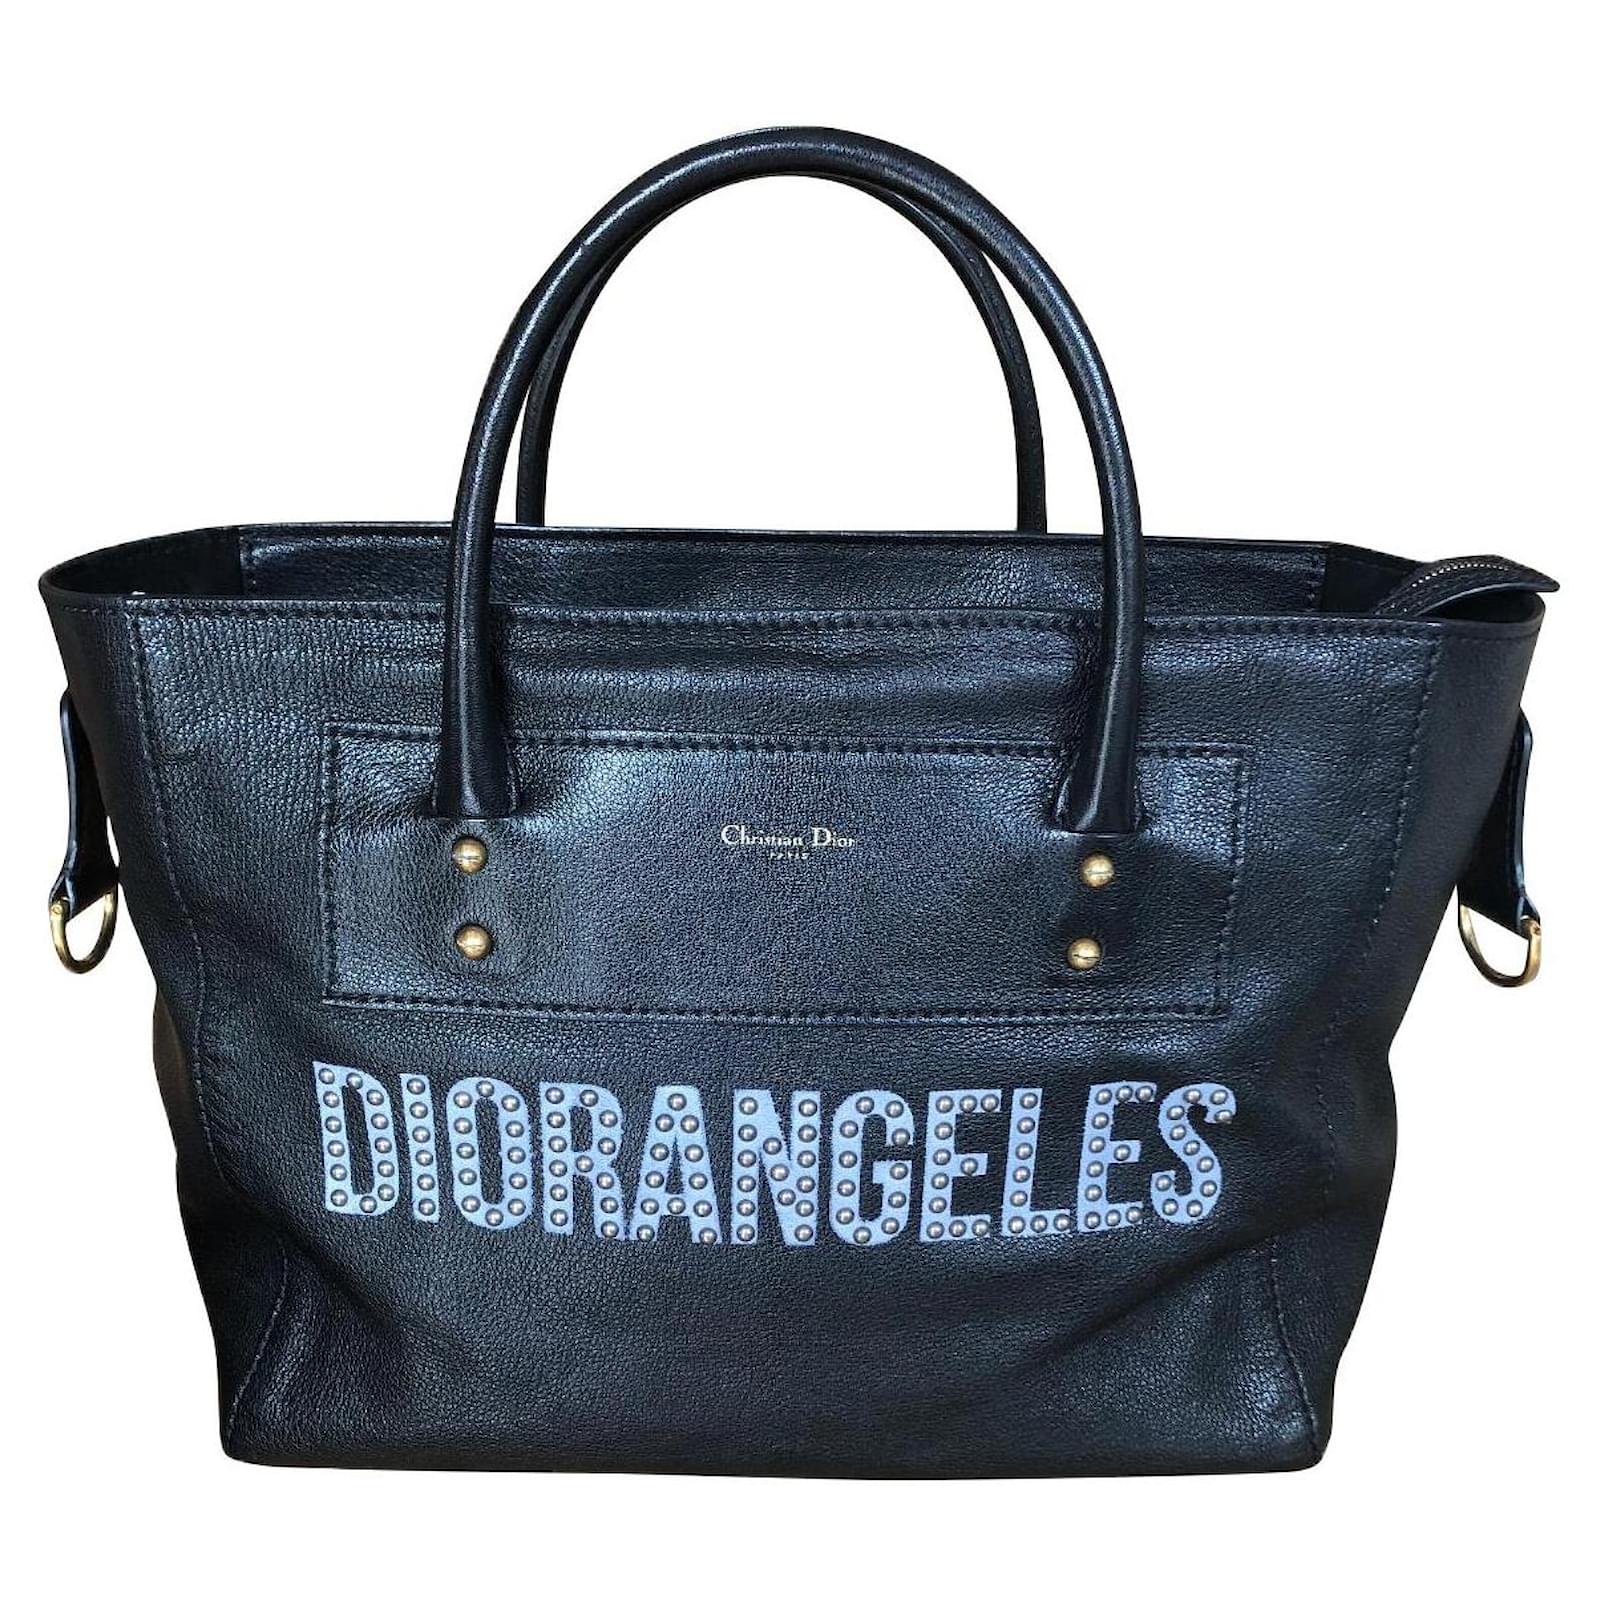 Christian Dior Diorangeles Leather Tote - Totes, Handbags | The RealReal